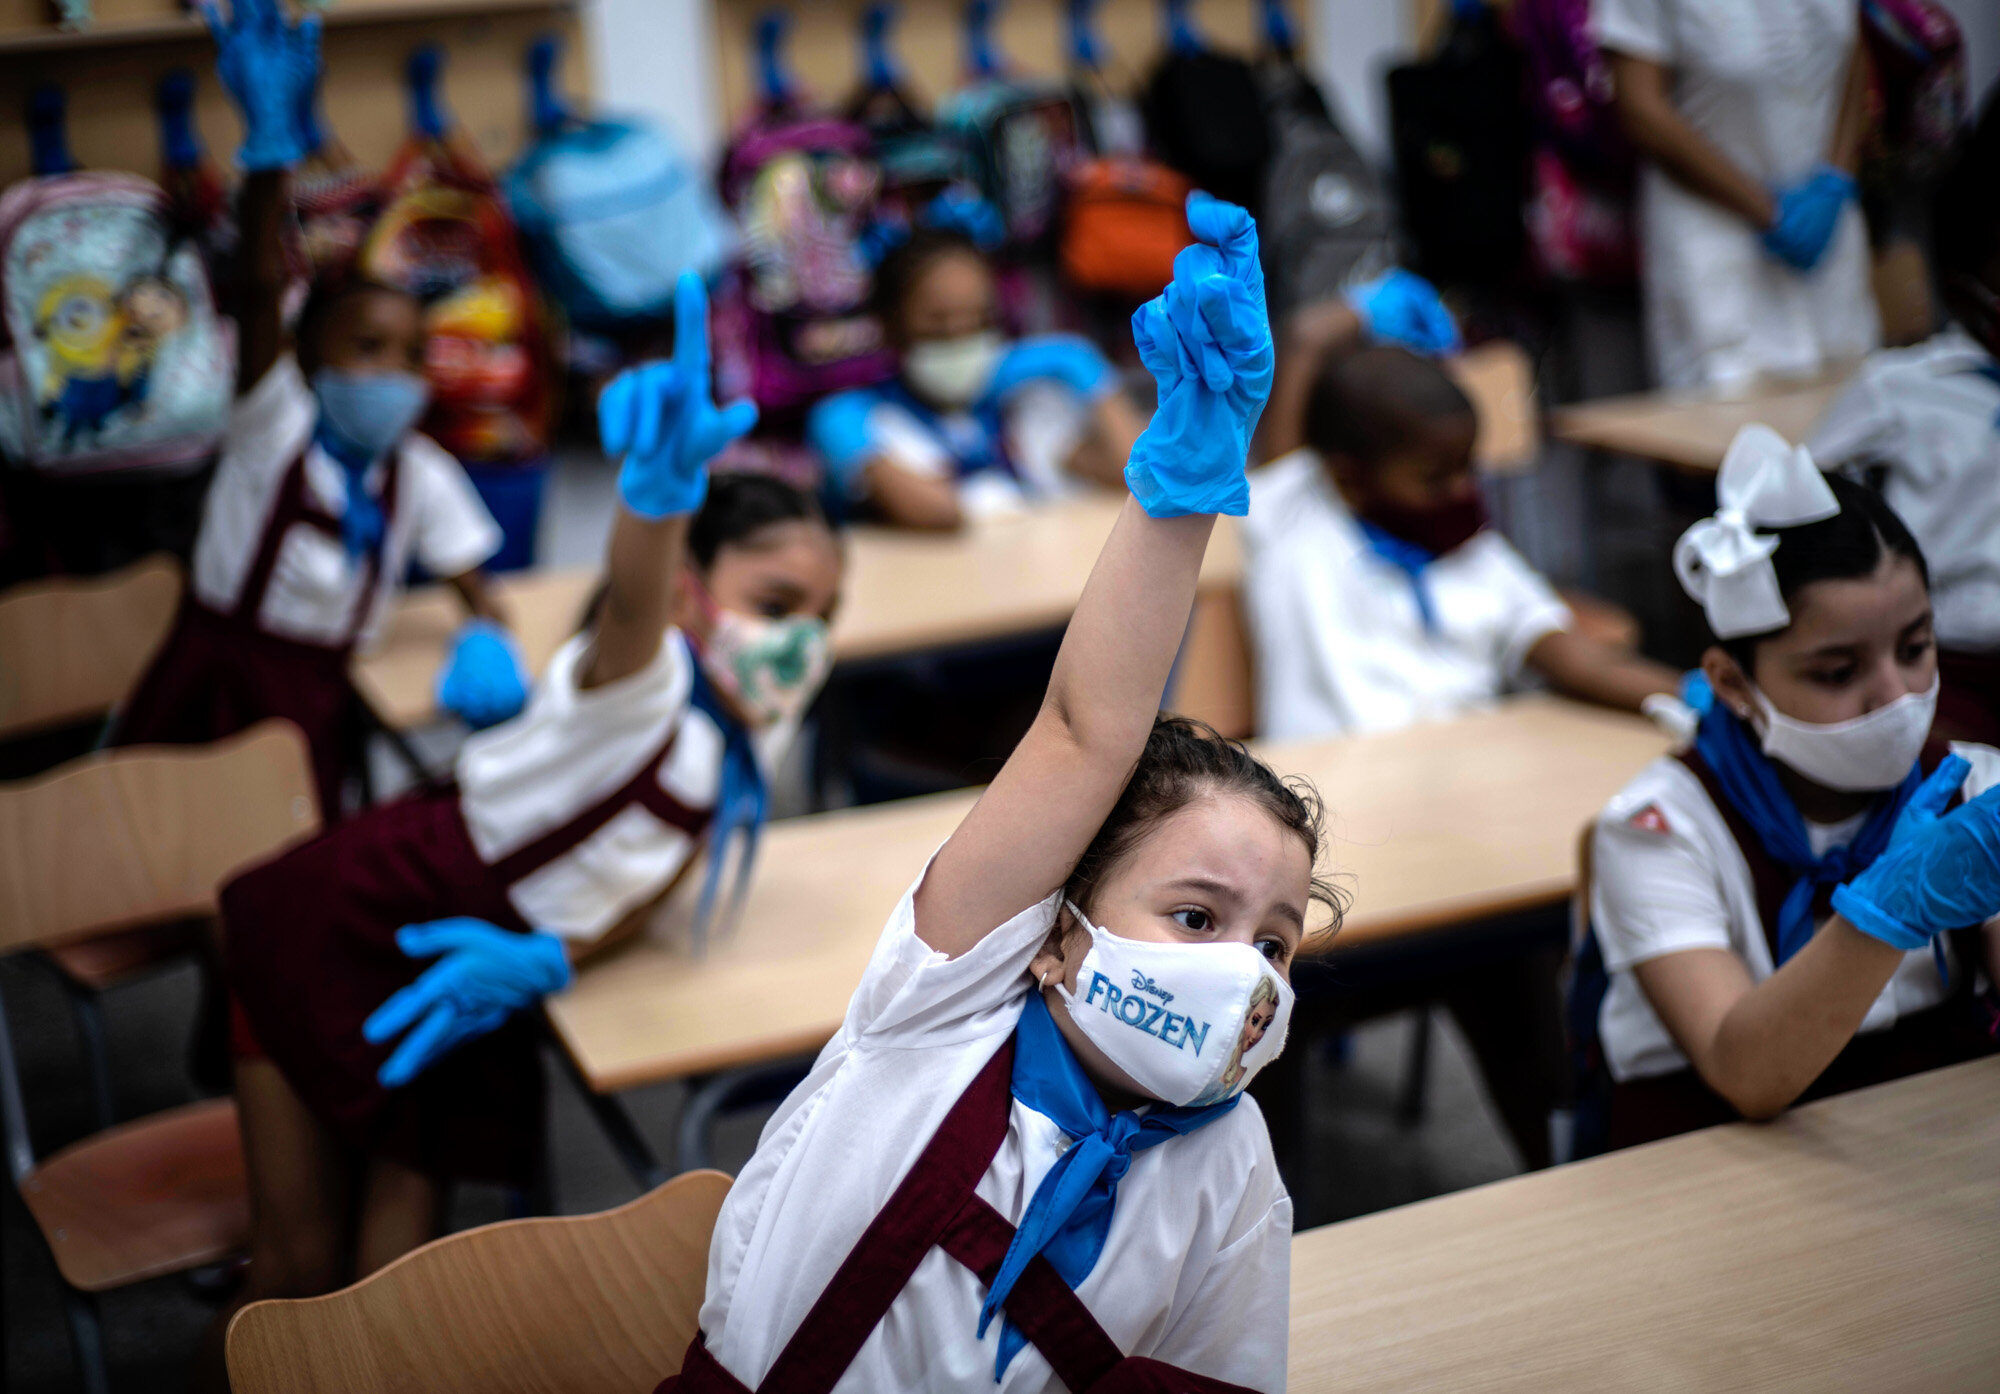  Wearing masks and plastic gloves to prevent the spread of the coronavirus, girls raise their hands during class in Havana, Cuba, on Monday, Nov. 2, 2020. Tens of thousands of school children returned to class Monday in Havana for the first time sinc